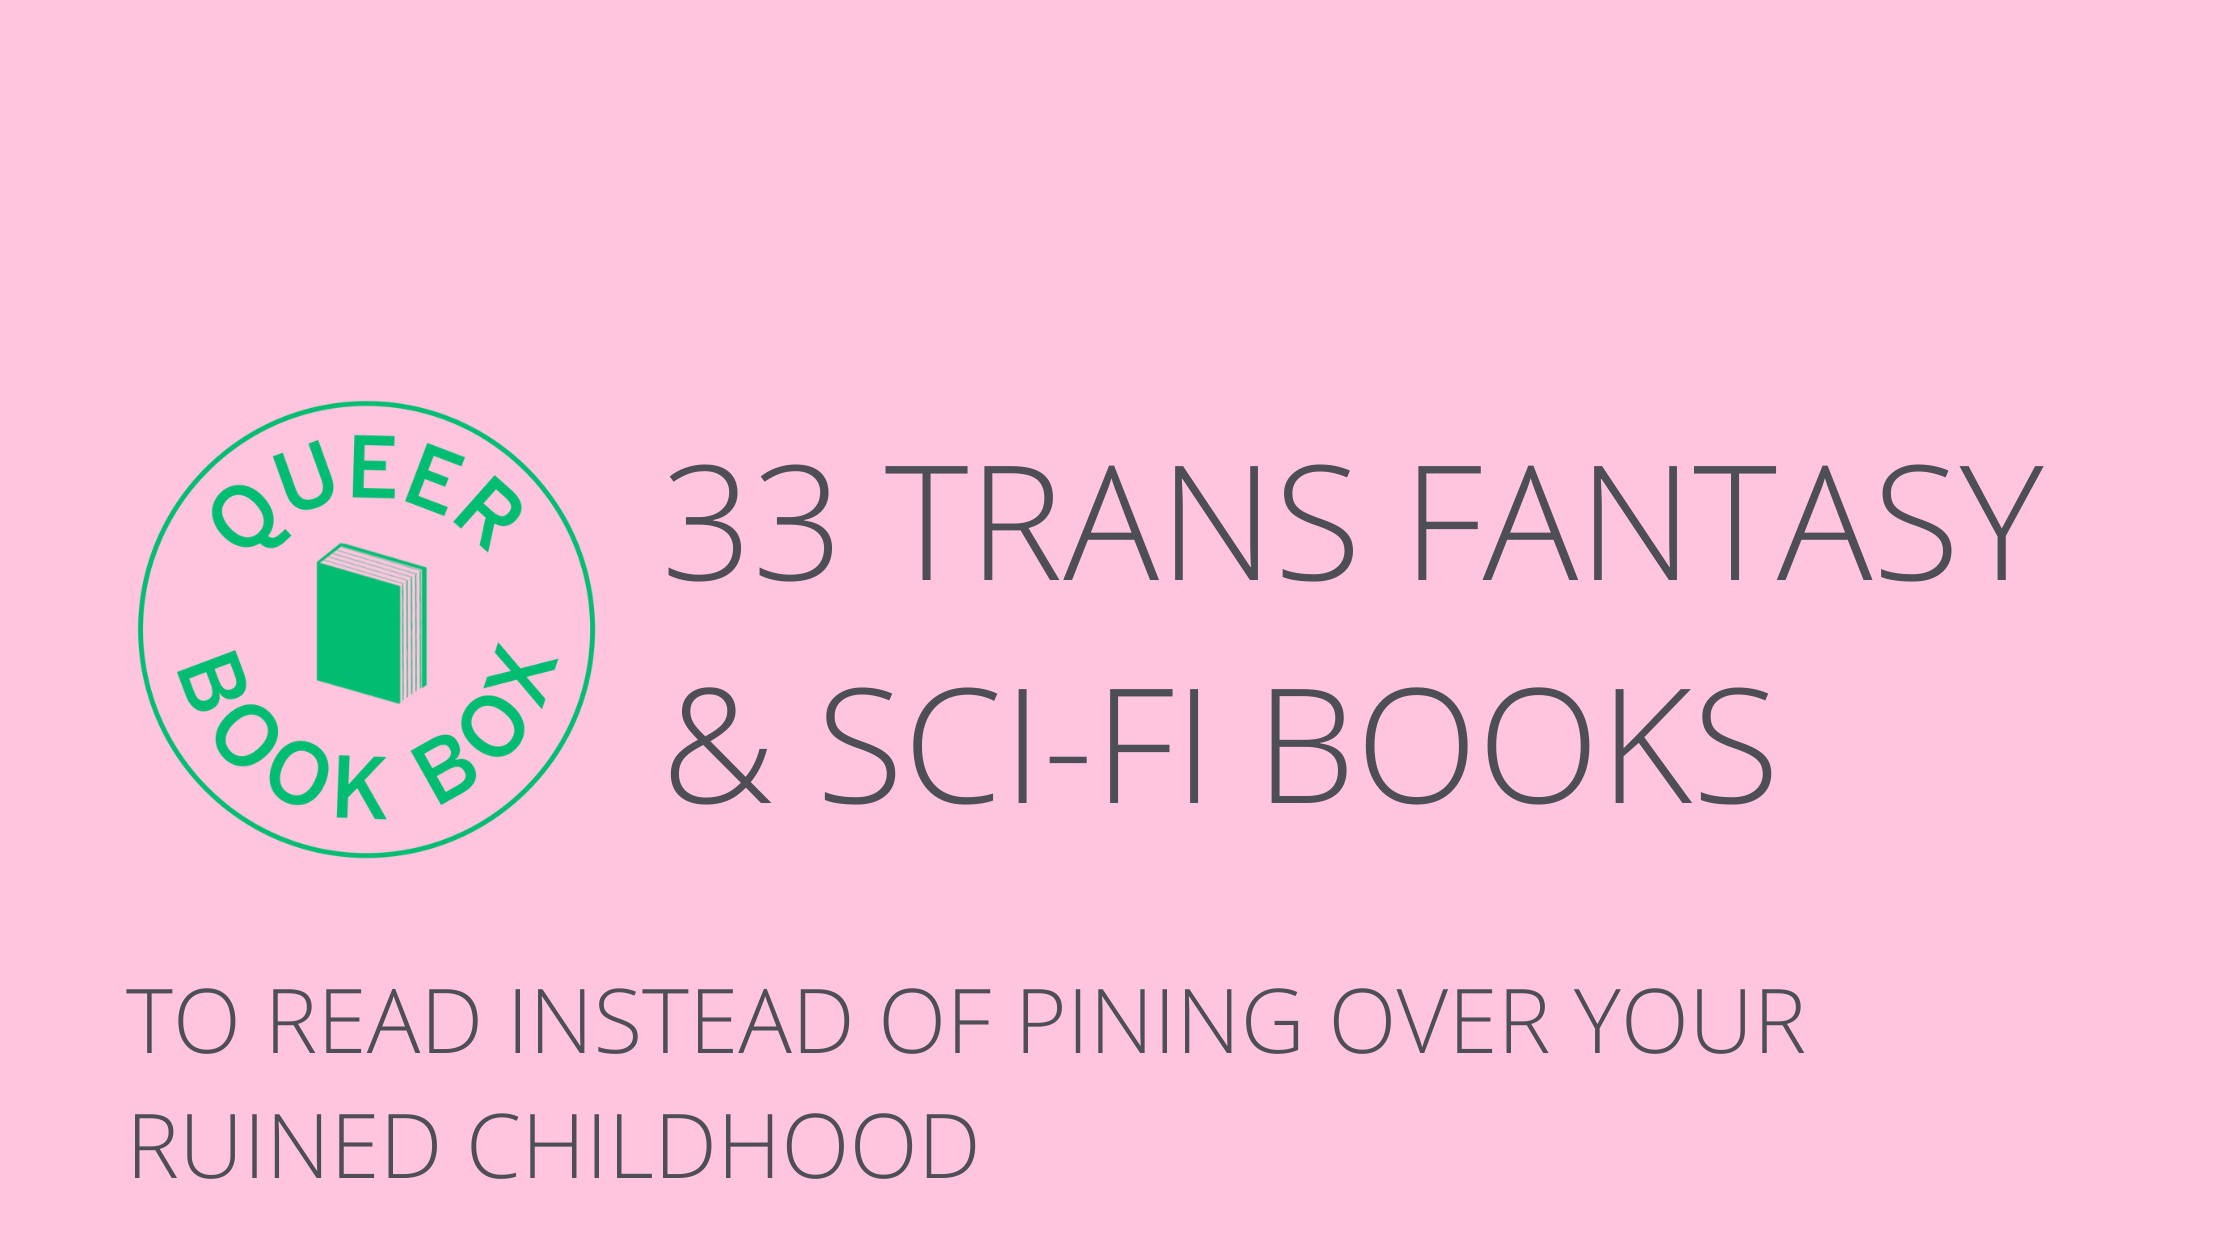 33 trans fantasy and sci-fi books to read instead of pining over your ruined childhood